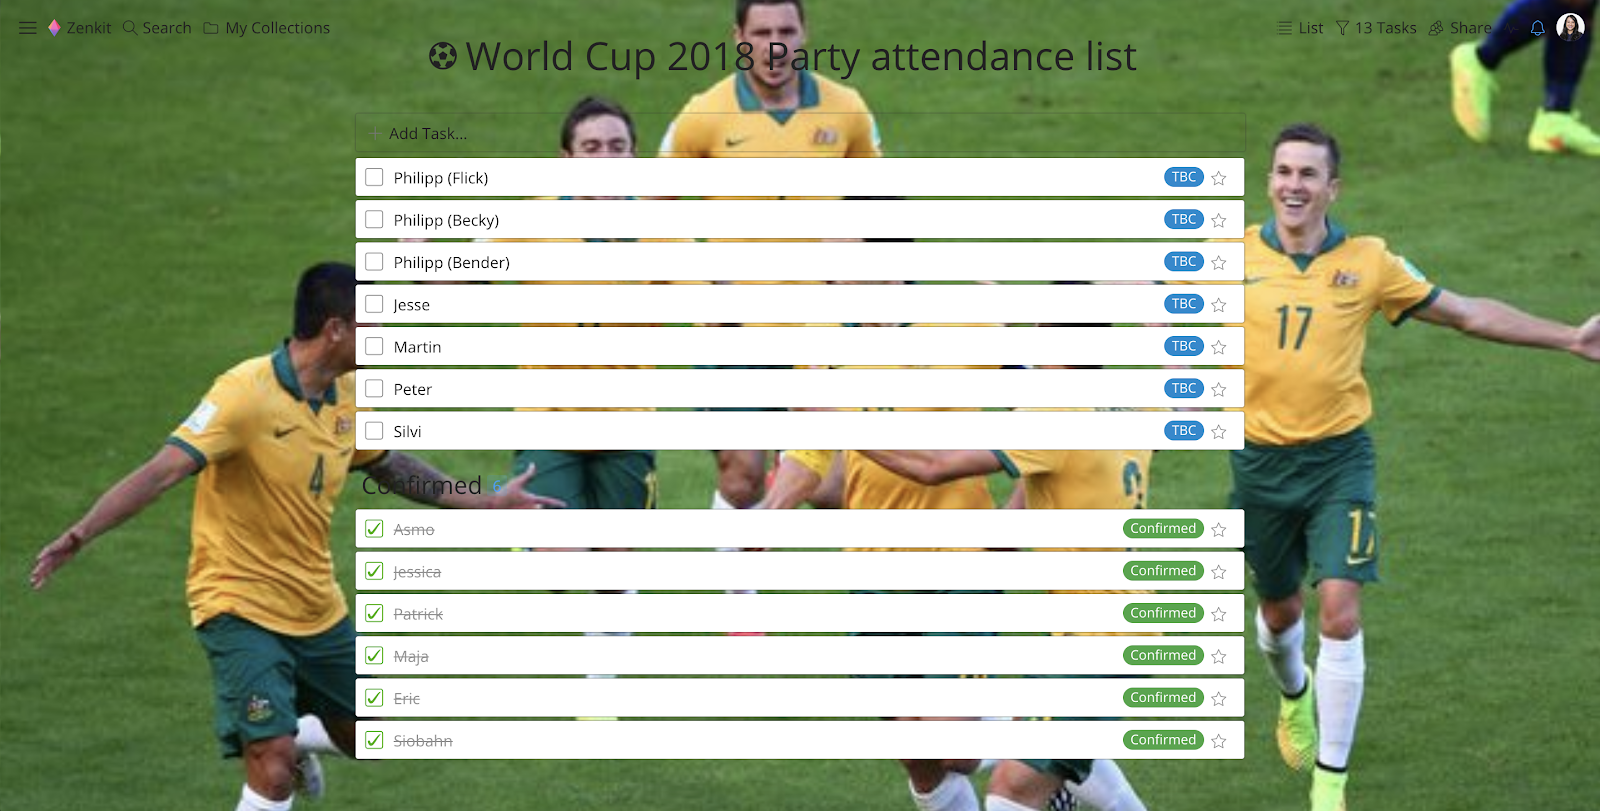 World Cup party attendance list